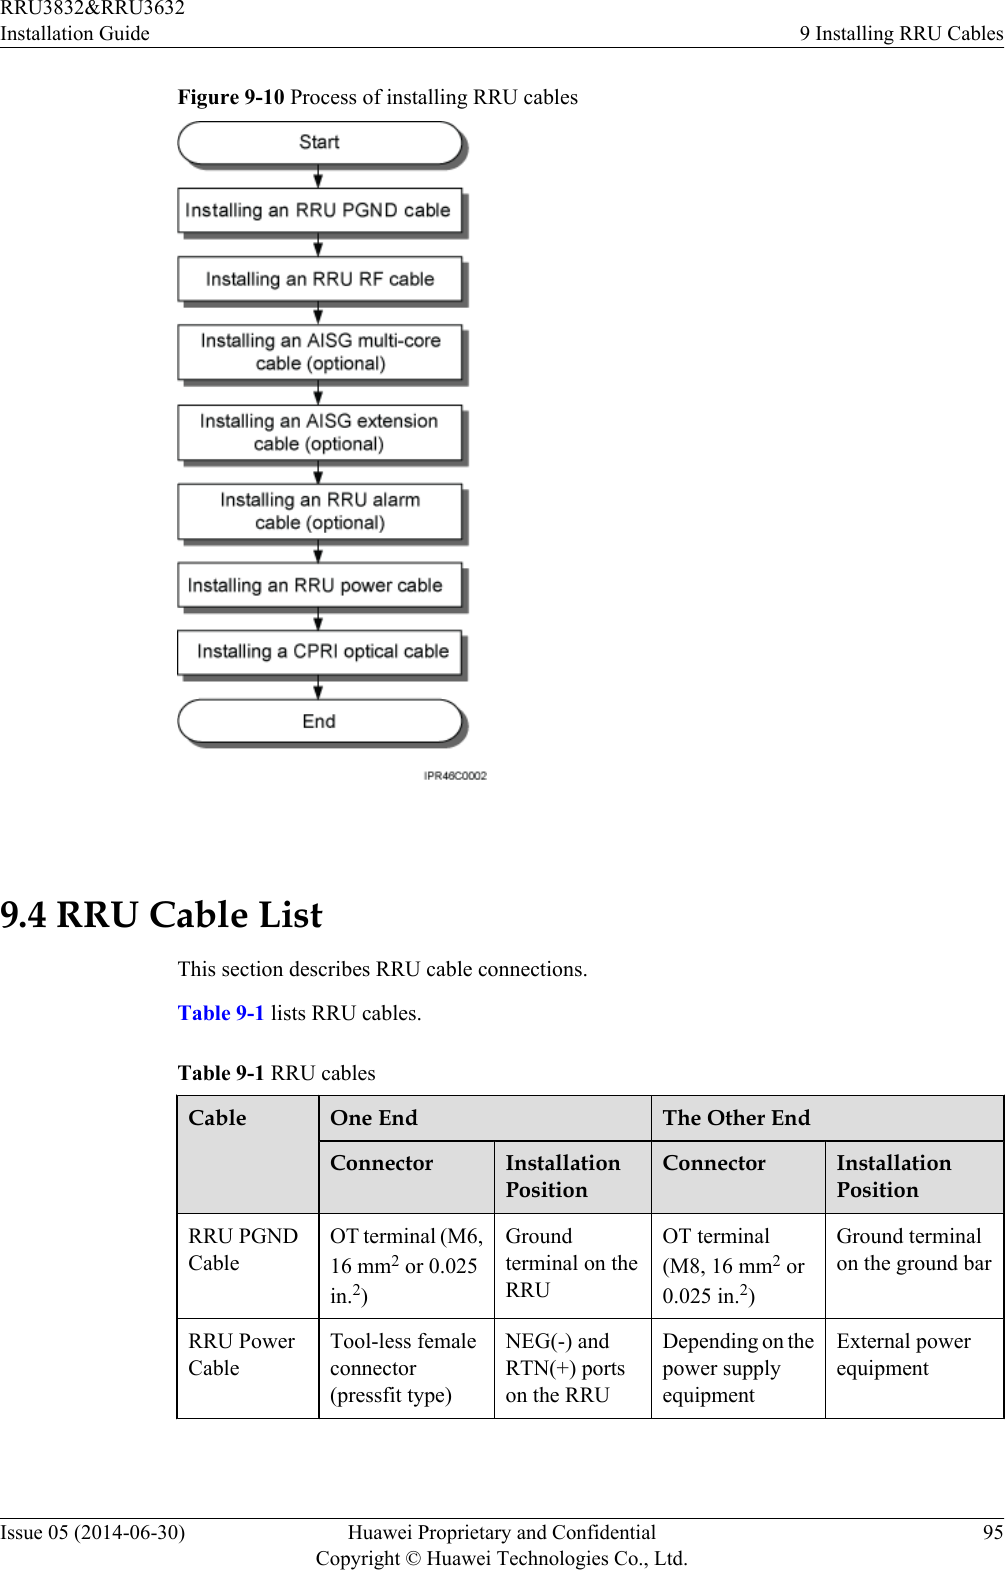 Figure 9-10 Process of installing RRU cables 9.4 RRU Cable ListThis section describes RRU cable connections.Table 9-1 lists RRU cables.Table 9-1 RRU cablesCable One End The Other EndConnector InstallationPositionConnector InstallationPositionRRU PGNDCableOT terminal (M6,16 mm2 or 0.025in.2)Groundterminal on theRRUOT terminal(M8, 16 mm2 or0.025 in.2)Ground terminalon the ground barRRU PowerCableTool-less femaleconnector(pressfit type)NEG(-) andRTN(+) portson the RRUDepending on thepower supplyequipmentExternal powerequipmentRRU3832&amp;RRU3632Installation Guide 9 Installing RRU CablesIssue 05 (2014-06-30) Huawei Proprietary and ConfidentialCopyright © Huawei Technologies Co., Ltd.95